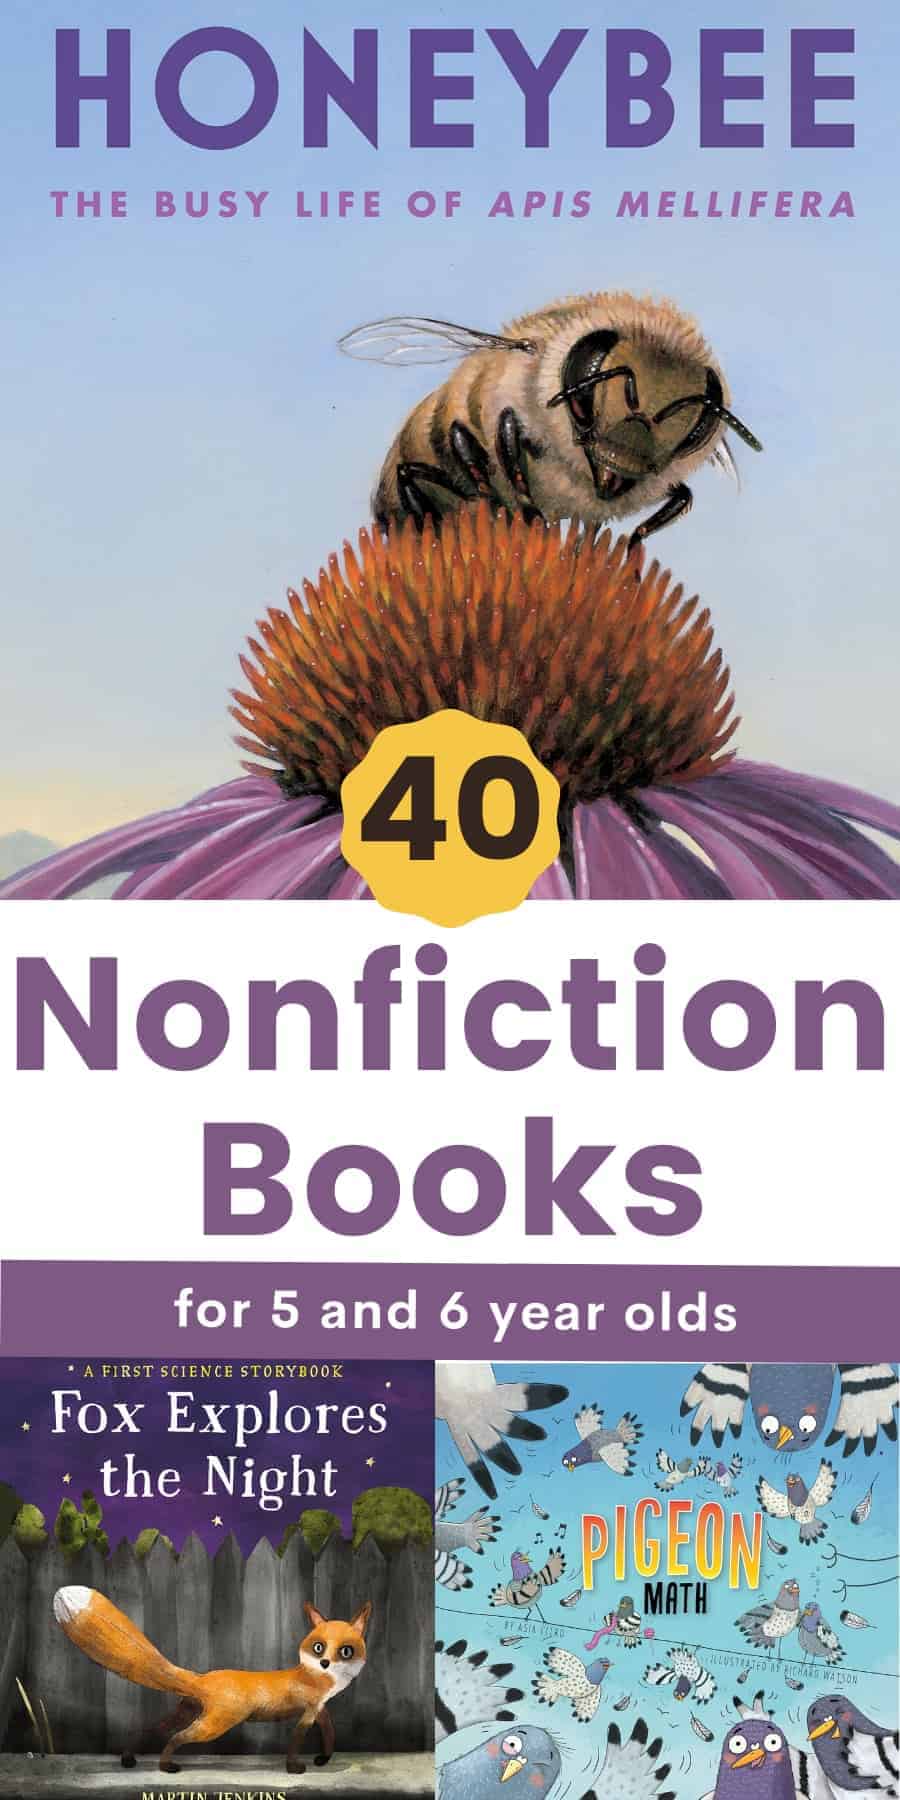 nonfiction books for 5 and 6 year olds in kindergarten and first grade